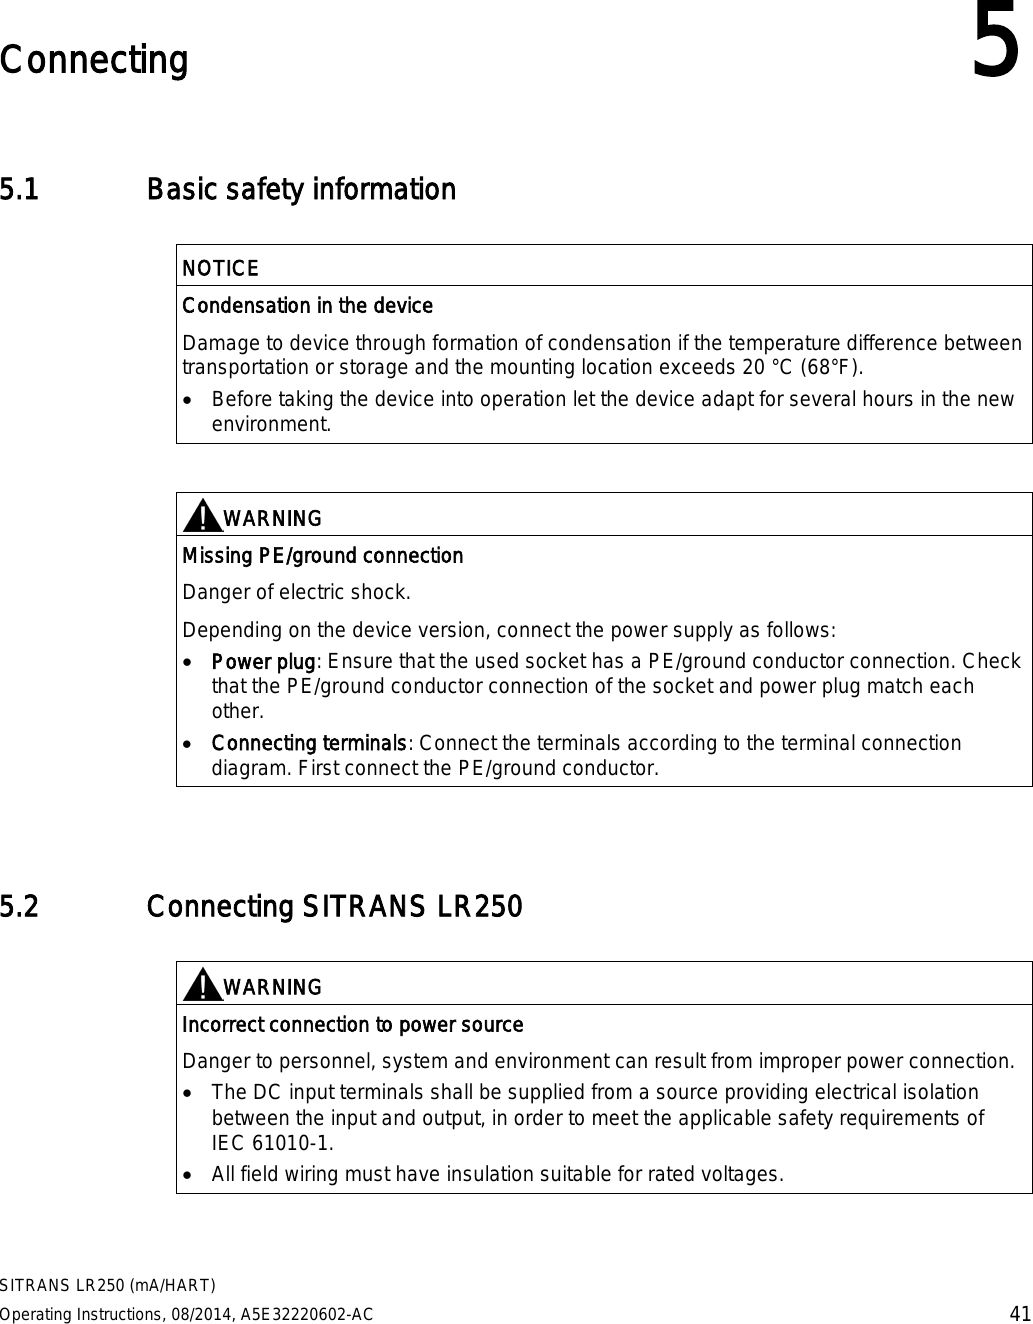  SITRANS LR250 (mA/HART) Operating Instructions, 08/2014, A5E32220602-AC 41  Connecting 5 5.1 Basic safety information   NOTICE Condensation in the device Damage to device through formation of condensation if the temperature difference between transportation or storage and the mounting location exceeds 20 °C (68°F). • Before taking the device into operation let the device adapt for several hours in the new environment.    WARNING Missing PE/ground connection Danger of electric shock. Depending on the device version, connect the power supply as follows: • Power plug: Ensure that the used socket has a PE/ground conductor connection. Check that the PE/ground conductor connection of the socket and power plug match each other. • Connecting terminals: Connect the terminals according to the terminal connection diagram. First connect the PE/ground conductor.  5.2 Connecting SITRANS LR250   WARNING Incorrect connection to power source Danger to personnel, system and environment can result from improper power connection. • The DC input terminals shall be supplied from a source providing electrical isolation between the input and output, in order to meet the applicable safety requirements of IEC 61010-1. • All field wiring must have insulation suitable for rated voltages.  